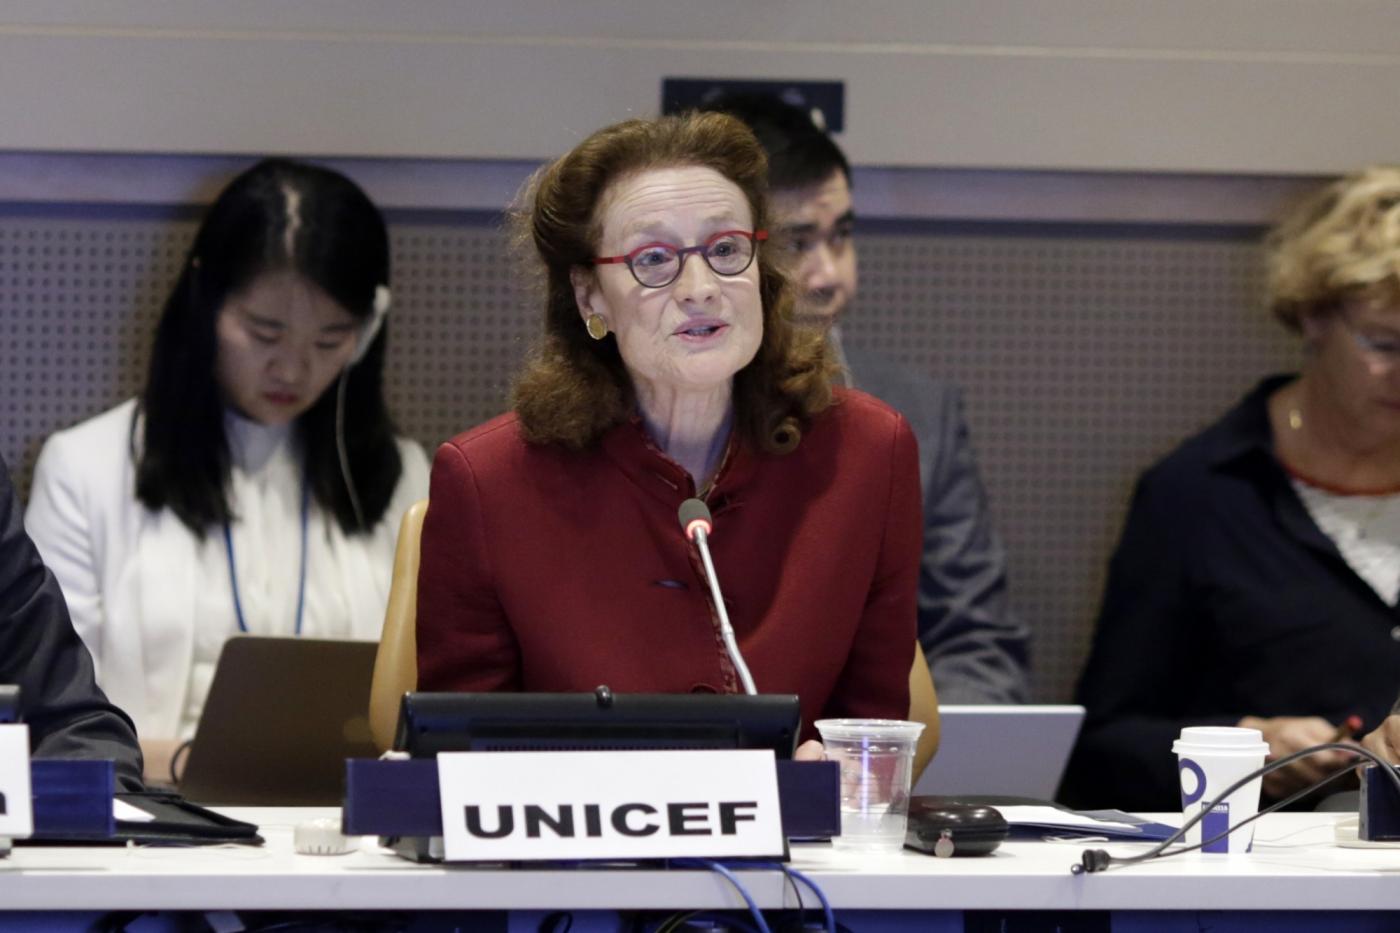 UNITED NATIONS, June 14, 2018 (Xinhua) -- UNICEF Executive Director Henrietta Fore addresses a high-level symposium on the Chinese Belt and Road Initiative and the UN 2030 Agenda for Sustainable Development at the UN headquarters in New York June 13, 2018. The vision of the Belt and Road Initiative is also a vision for children, as China's dramatic progress over the past two decades has also benefitted children, Henrietta Fore said on Wednesday. (Xinhua/Li Muzi/IANS) by .